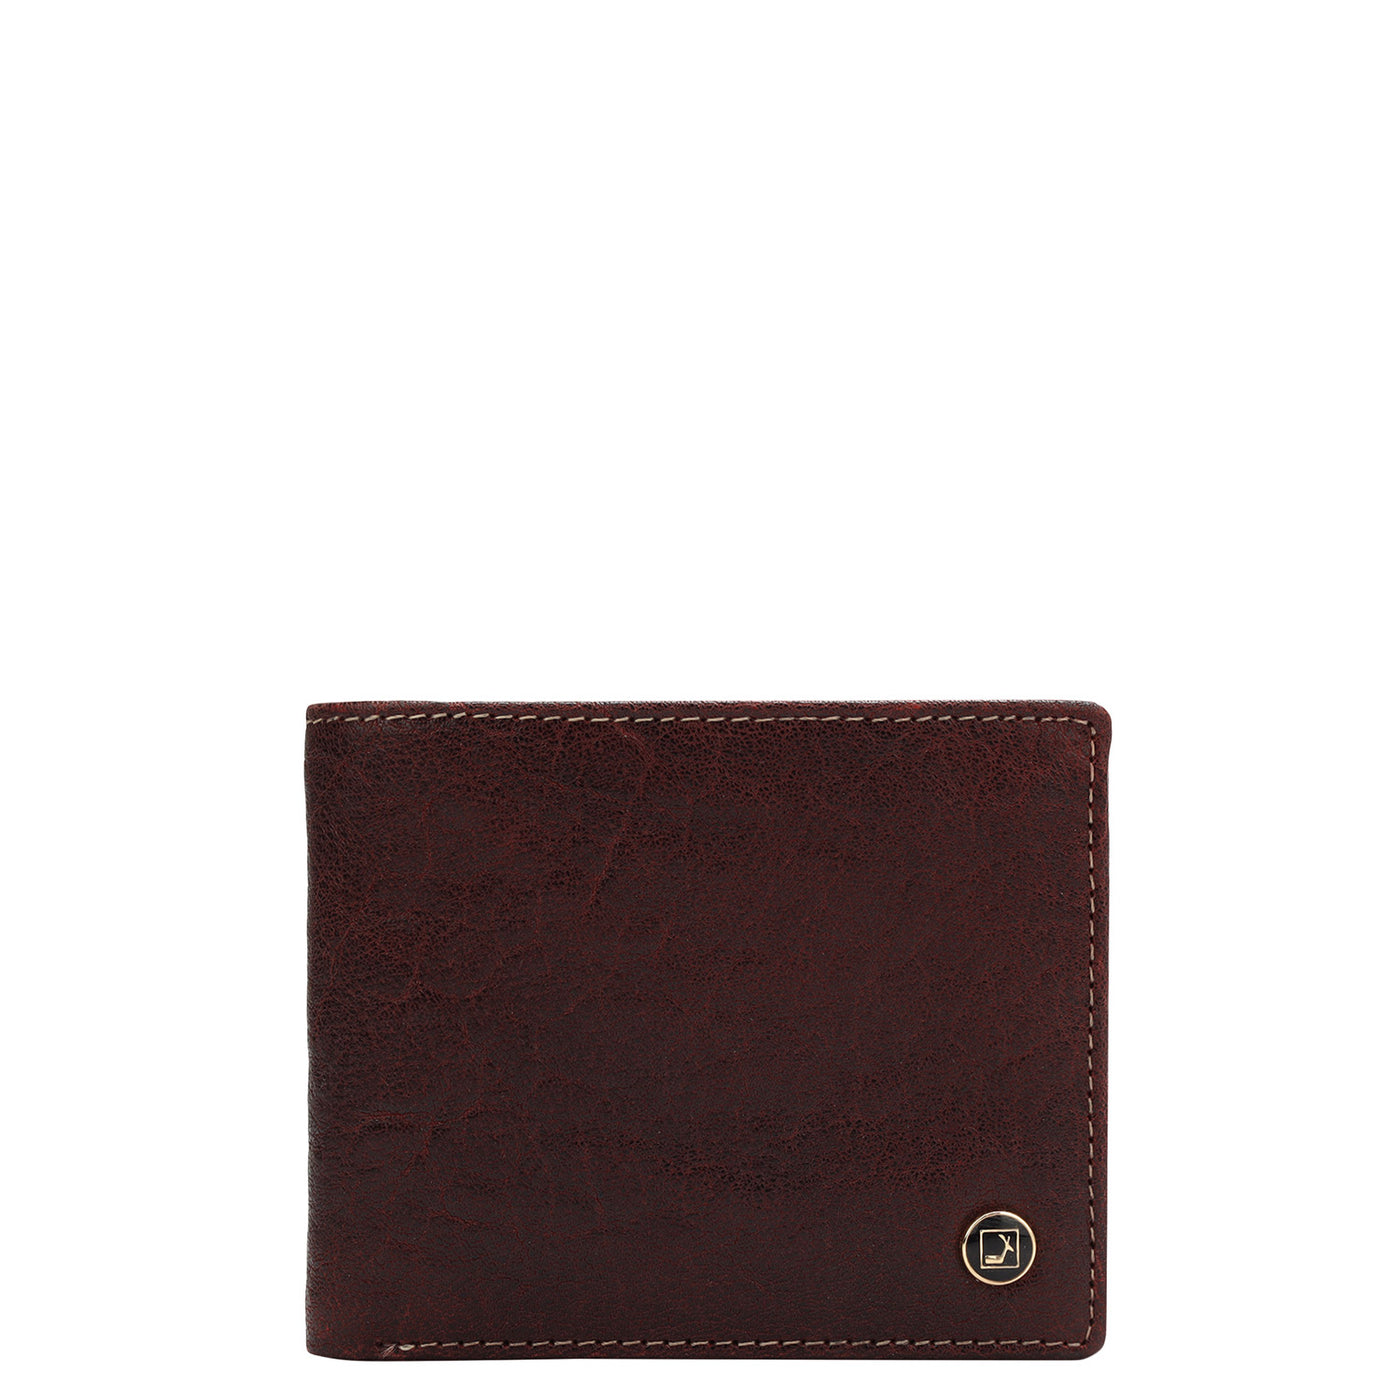 Elephant Pattern Leather Mens Wallet - Berry